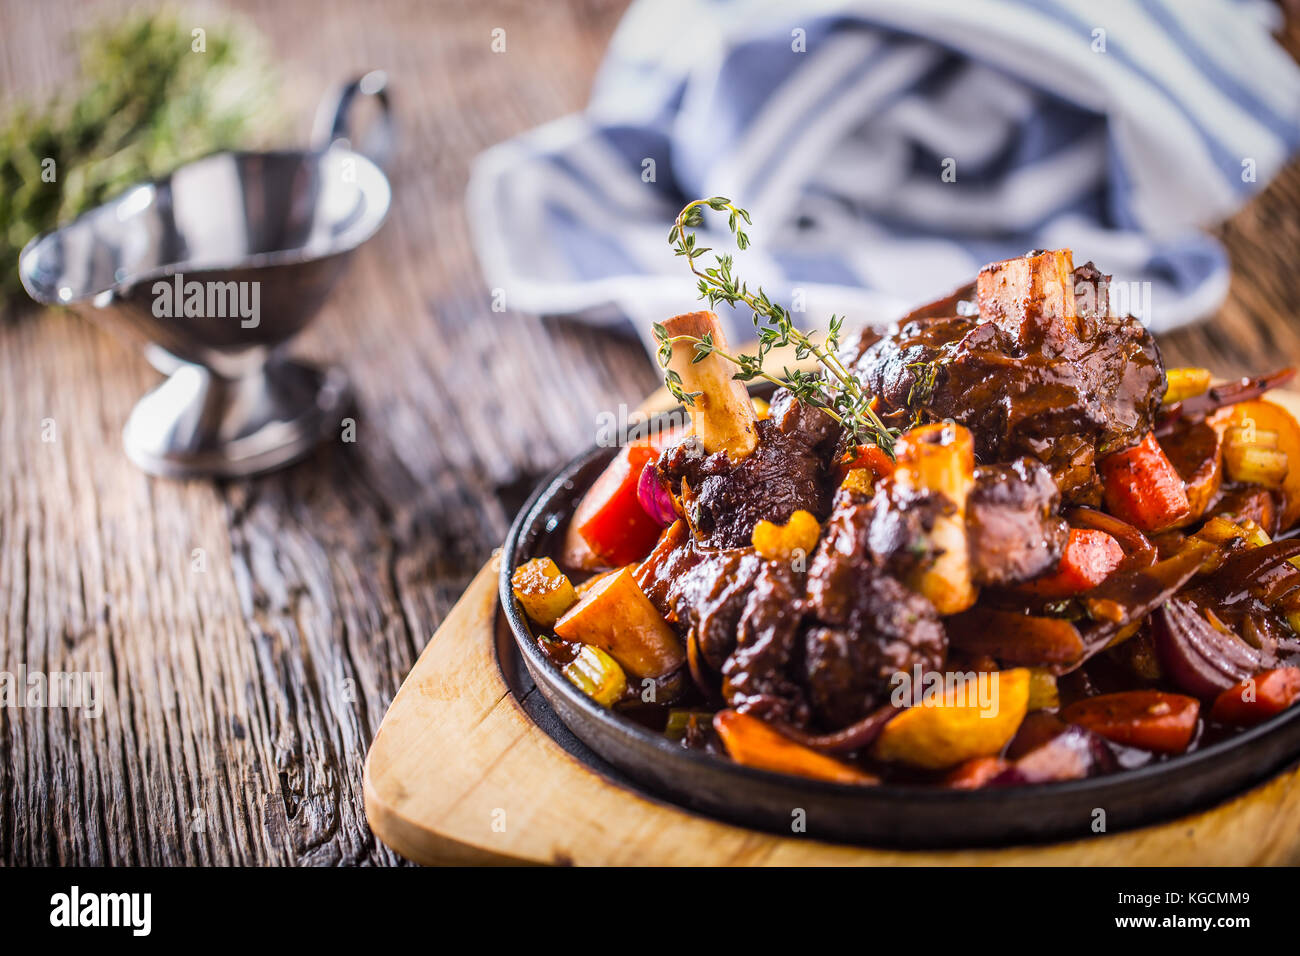 Lamb shank.Confit lamb shank with potatoes vegetable and draft beer in pub hotel or restaurant. Stock Photo